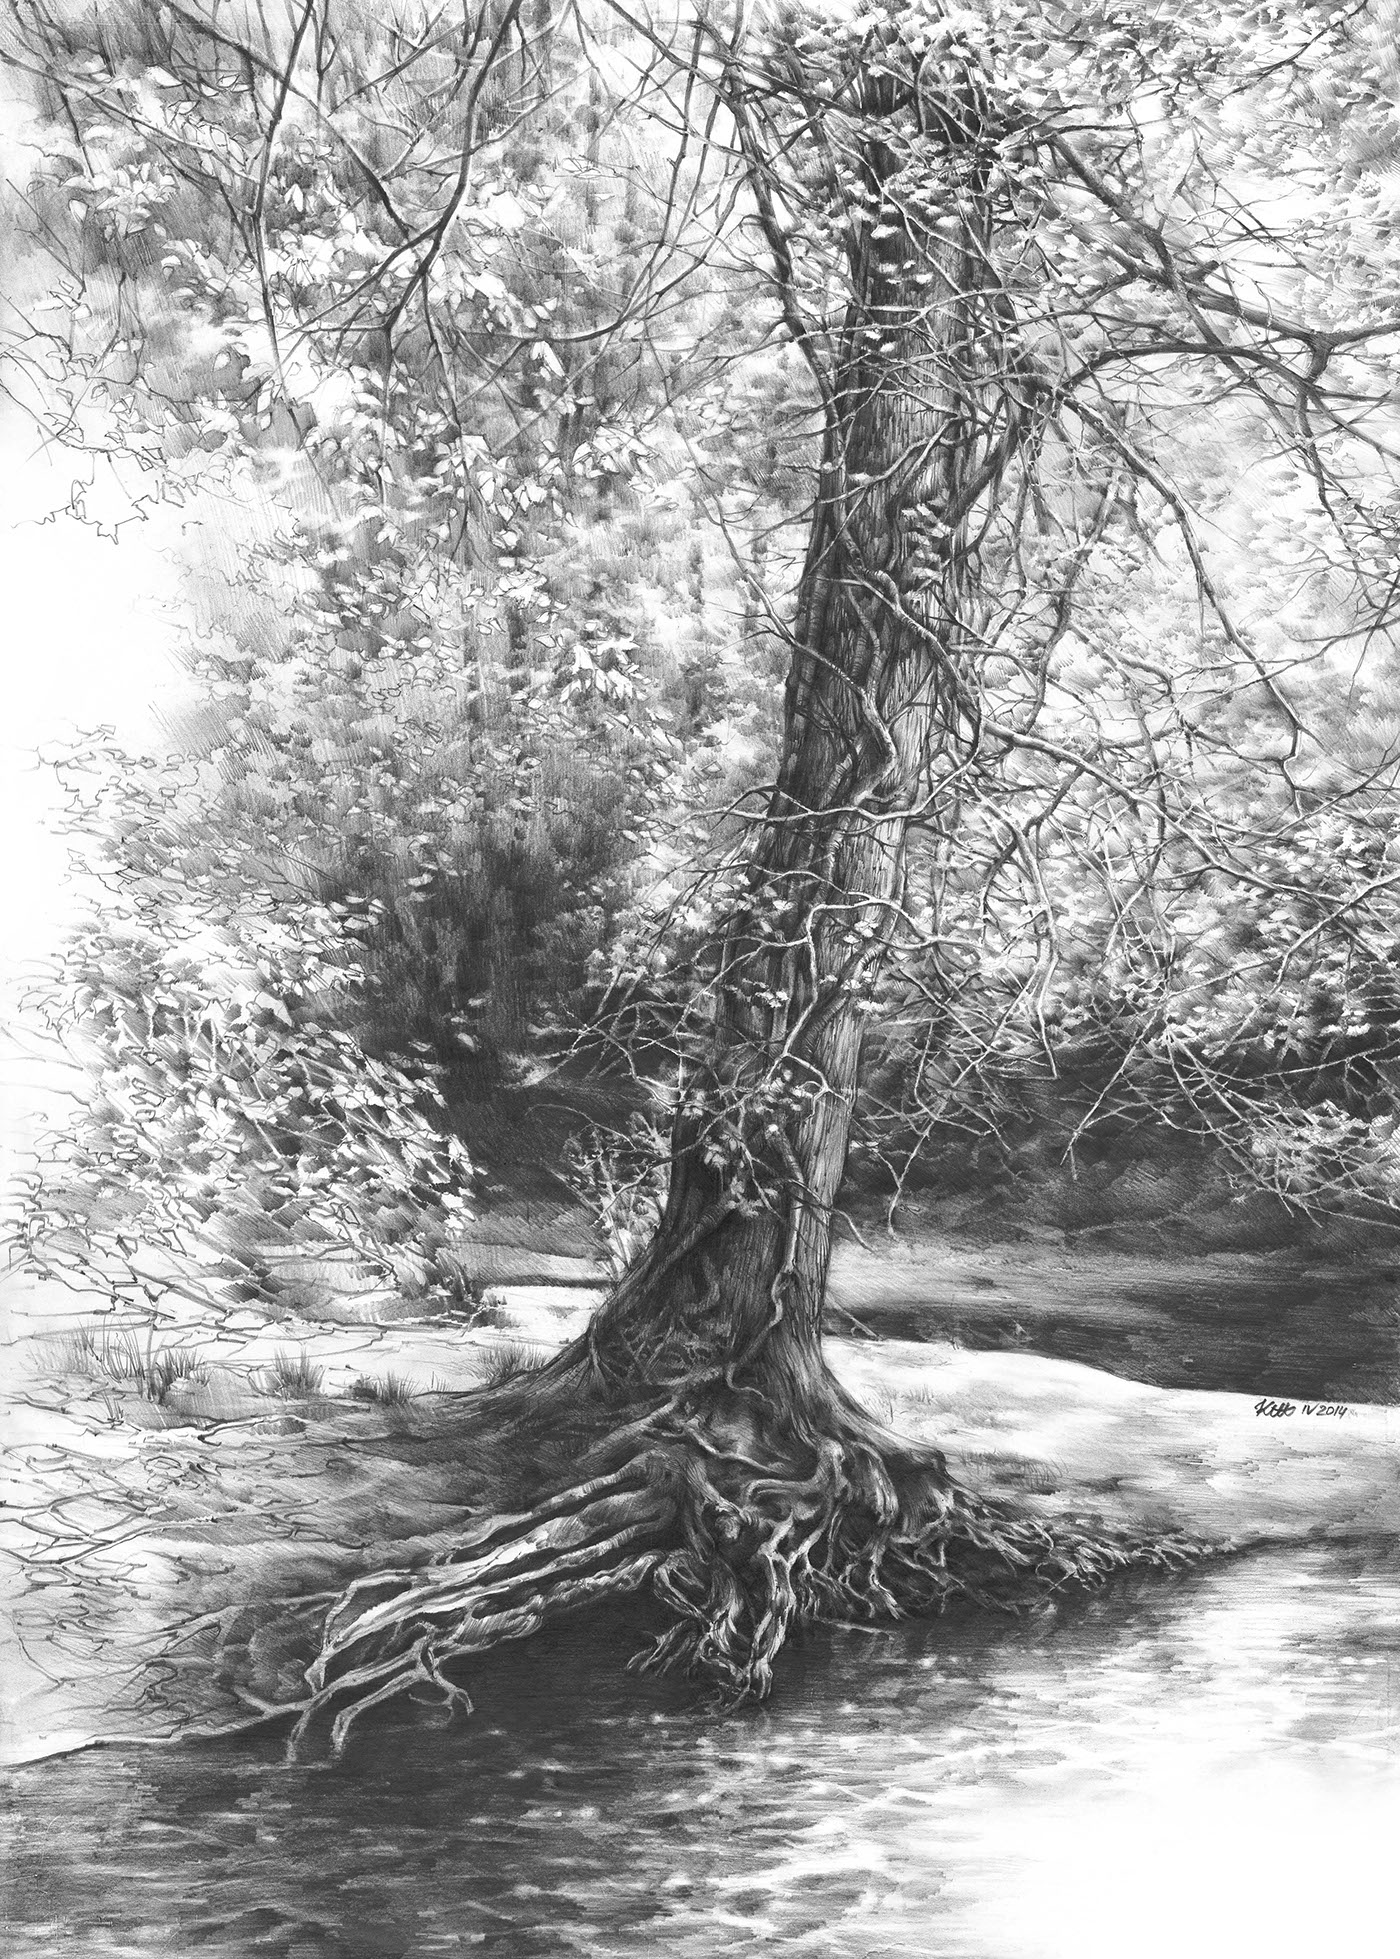 How to draw a realistic river Step1-Step 8 and shade it too | Landscape  drawings, River drawing, Realistic drawings